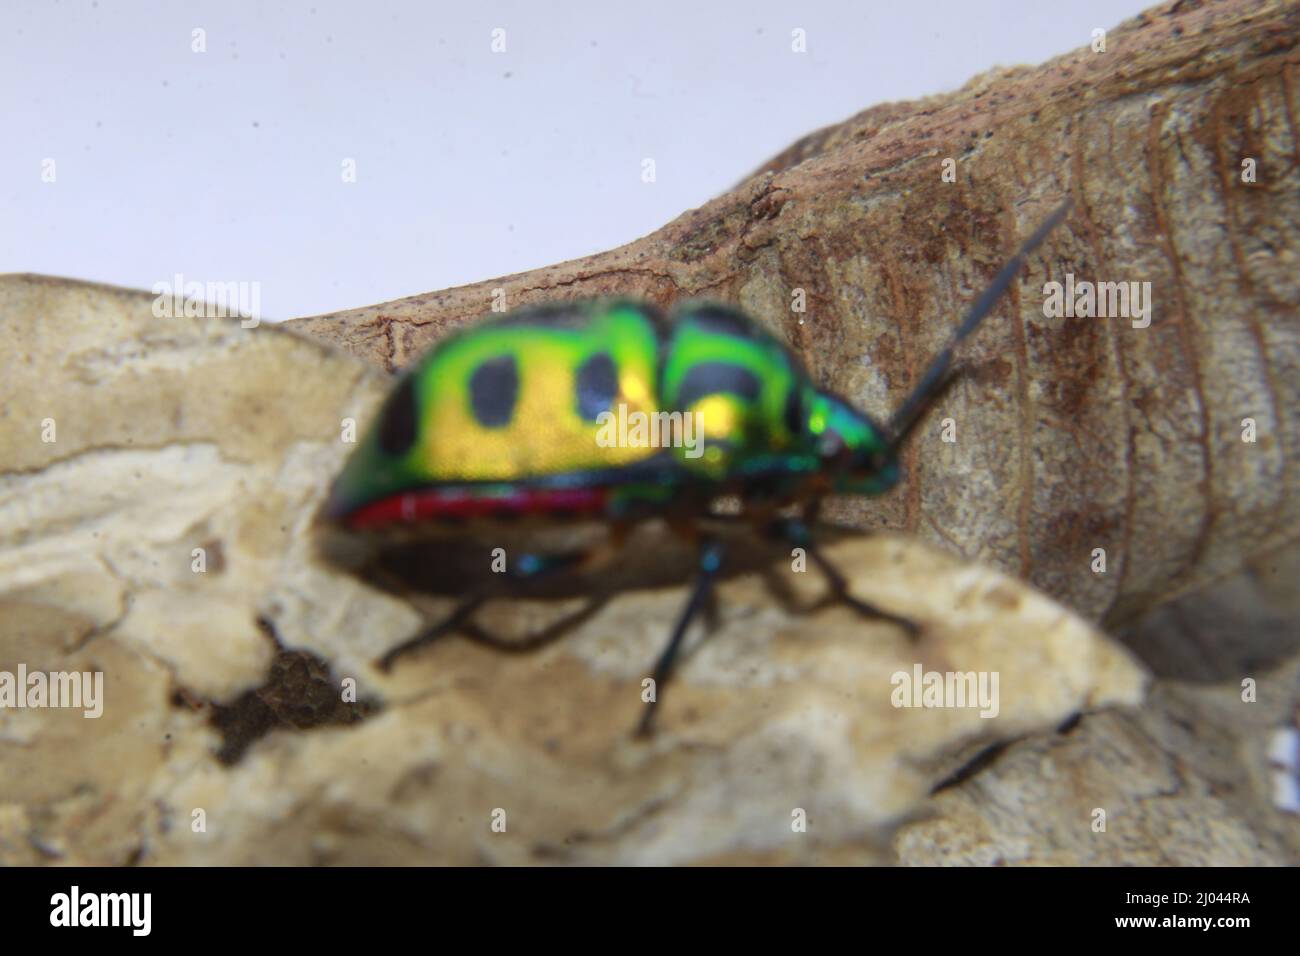 Scutelleridae is a family of true bugs. They are commonly known as jewel bugs or metallic shield bugs due to their often brilliant coloration. Stock Photo